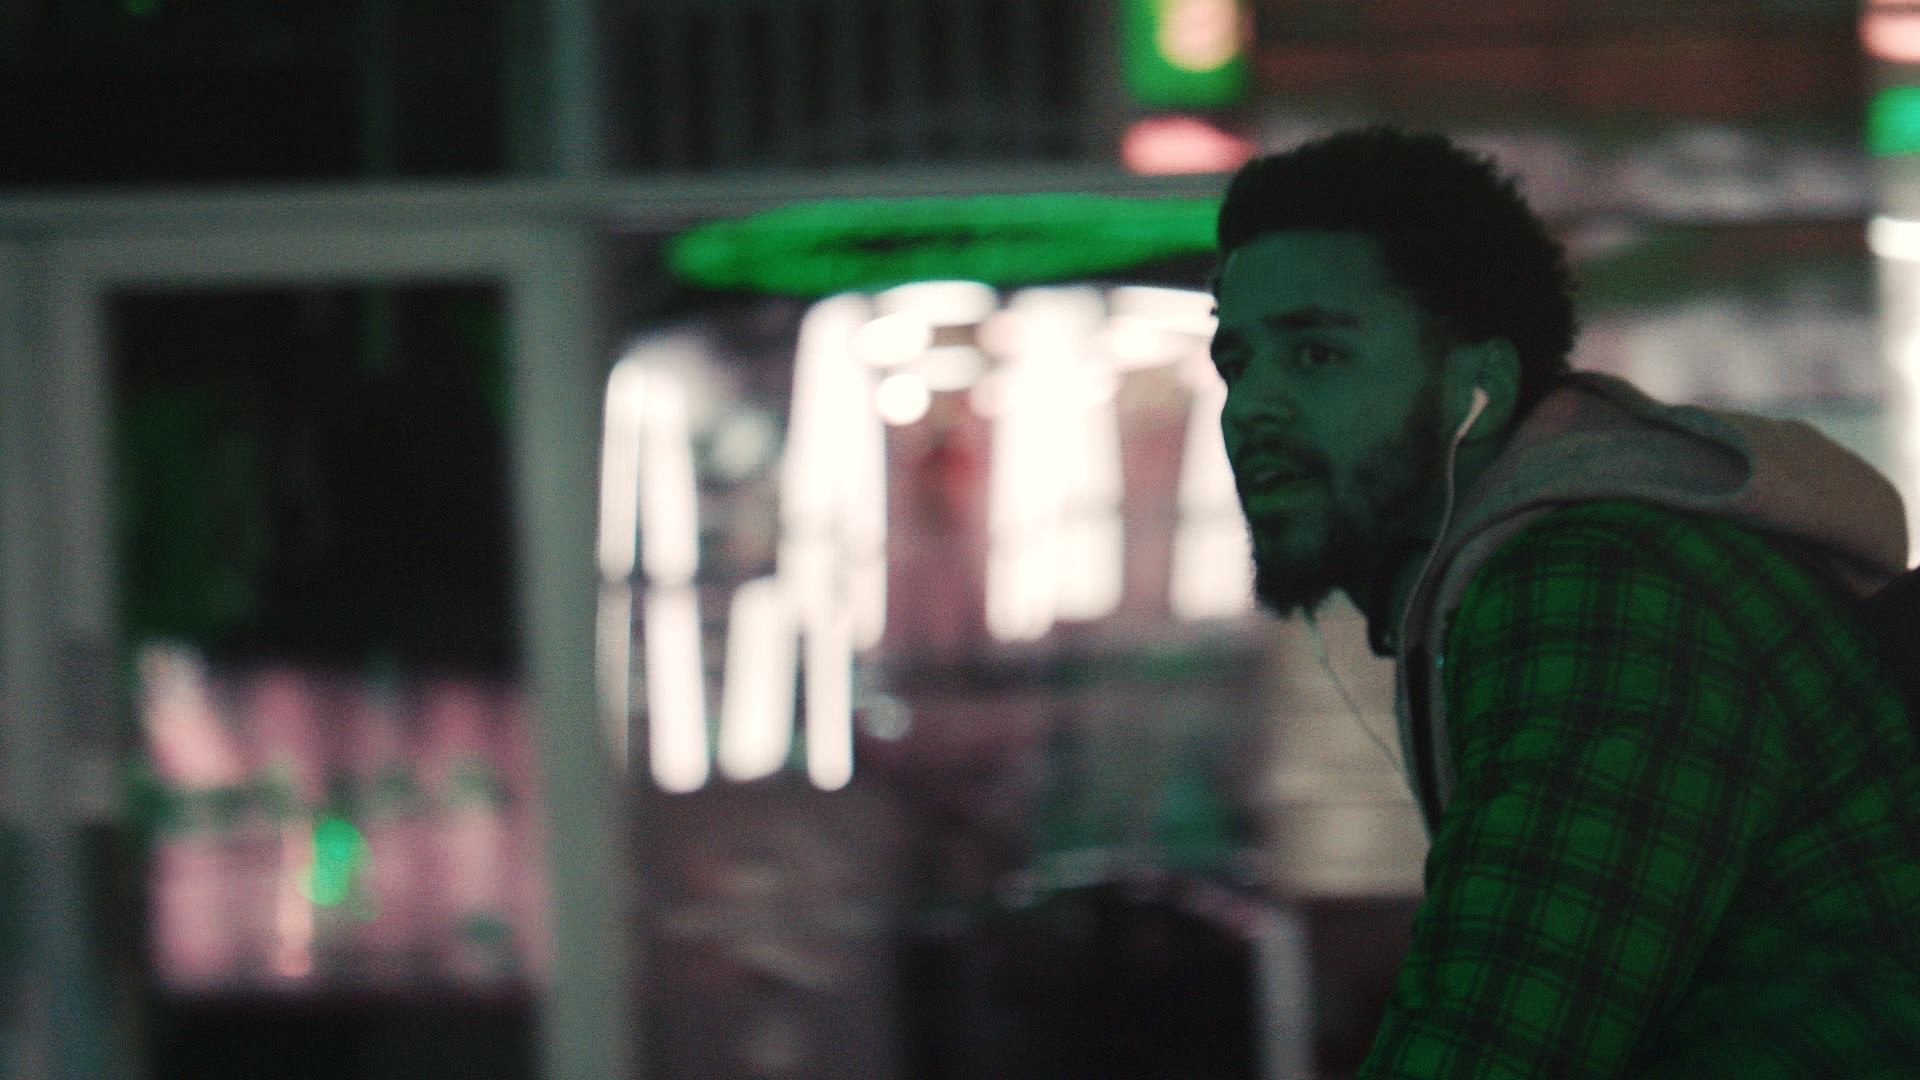 1920x1080 Watch J. Cole's “Intro” to 2014 Forest Hills Drive [VIDEO] - Hive Society